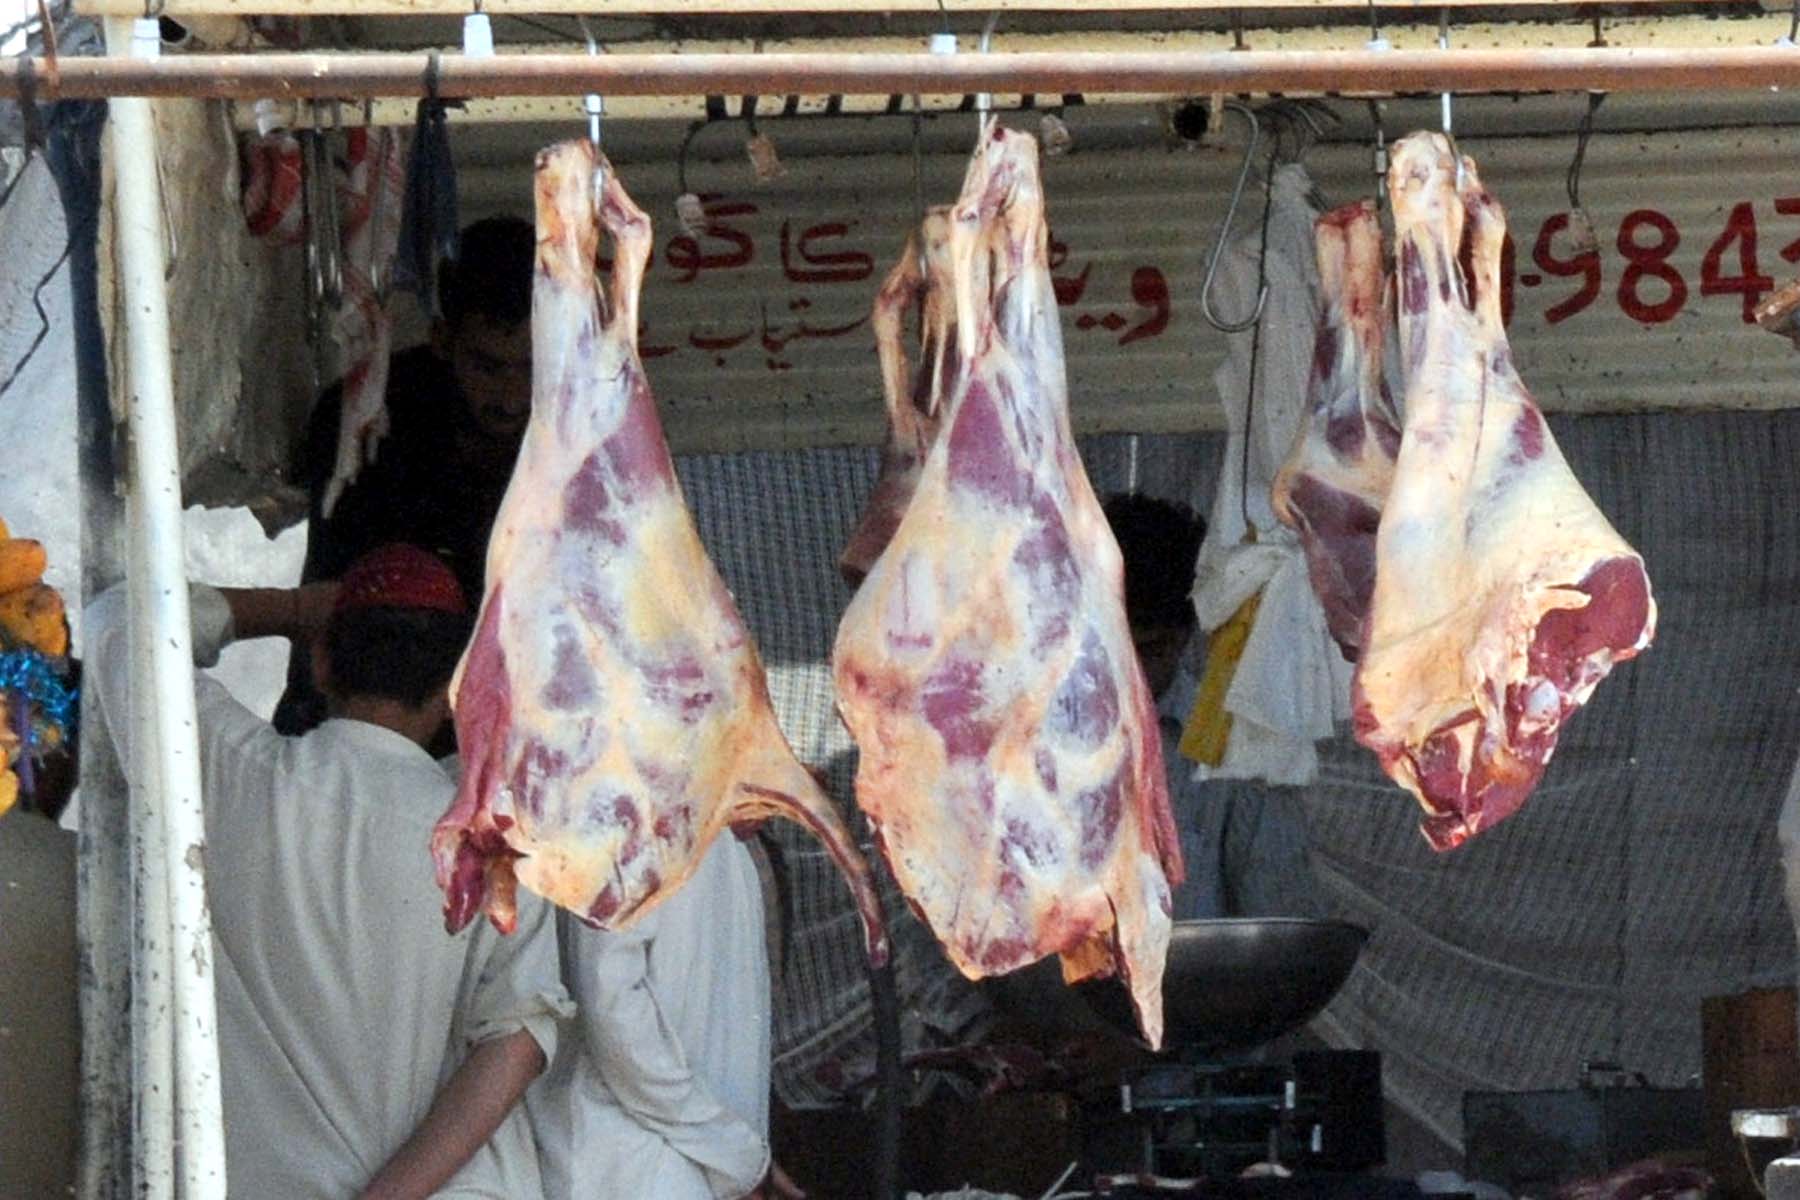 the european union eu he stated rejected 134 consignments of food items from pakistan in the last year resulting in losses and wastage of food the laboratory can analyse 1000 samples per annum which need to be increased further since pakistan is producing one of the largest food and meat producing countries in the world photo express